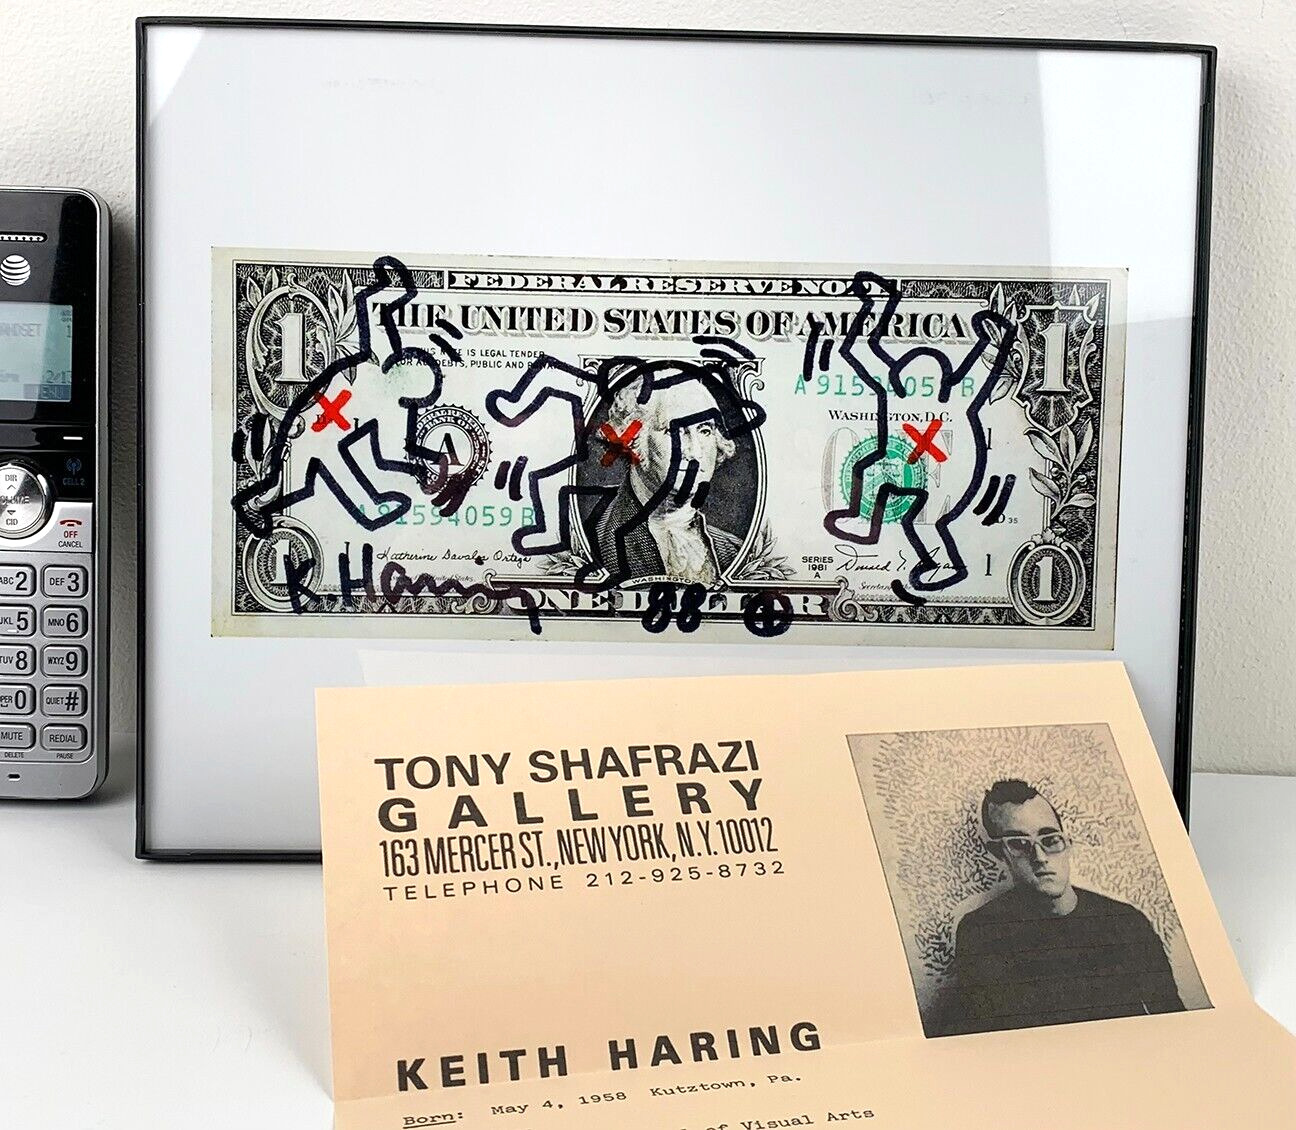 KEITH HARING - Signed Dollar Bill - 3 Dancers w/ Gallery Resume 1980s